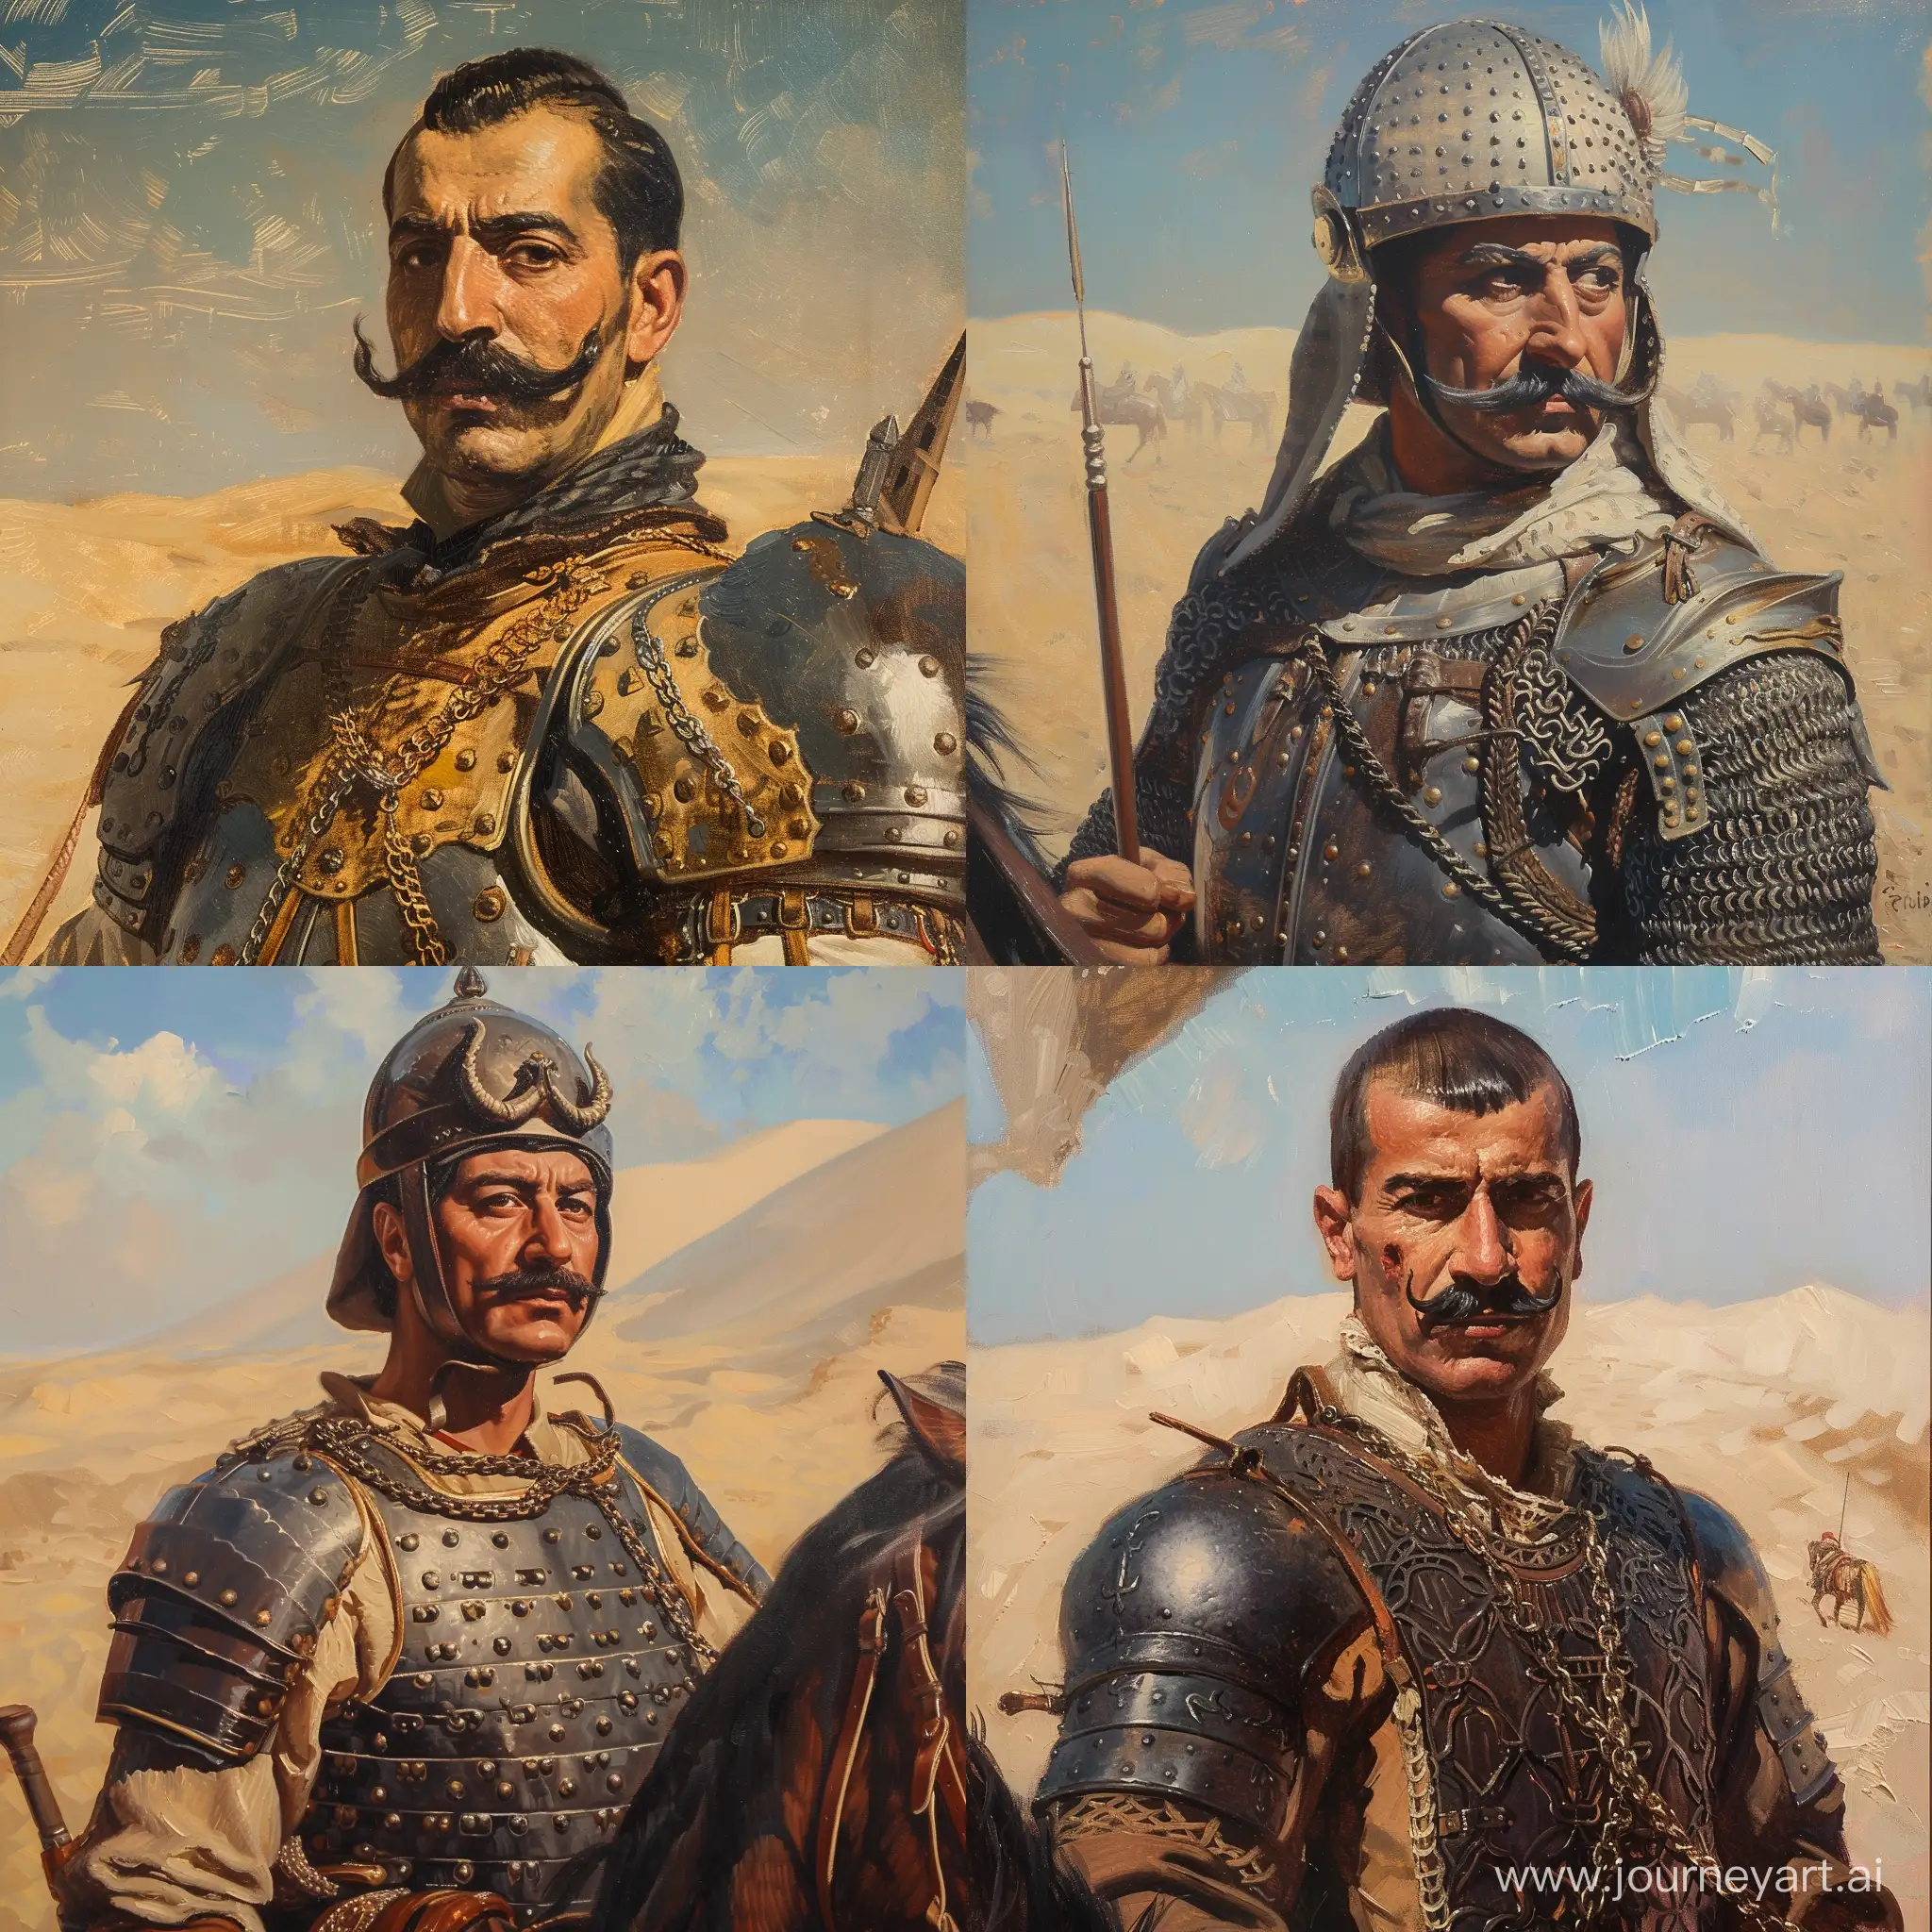 30 years old Ottoman Sultan Selim I on horse at Egyptian desert. He has handlebar mustache and no beard. Ottoman curved nose. Wearing Ottoman chainmail armor and helmet. Oil painting. brush strikes.